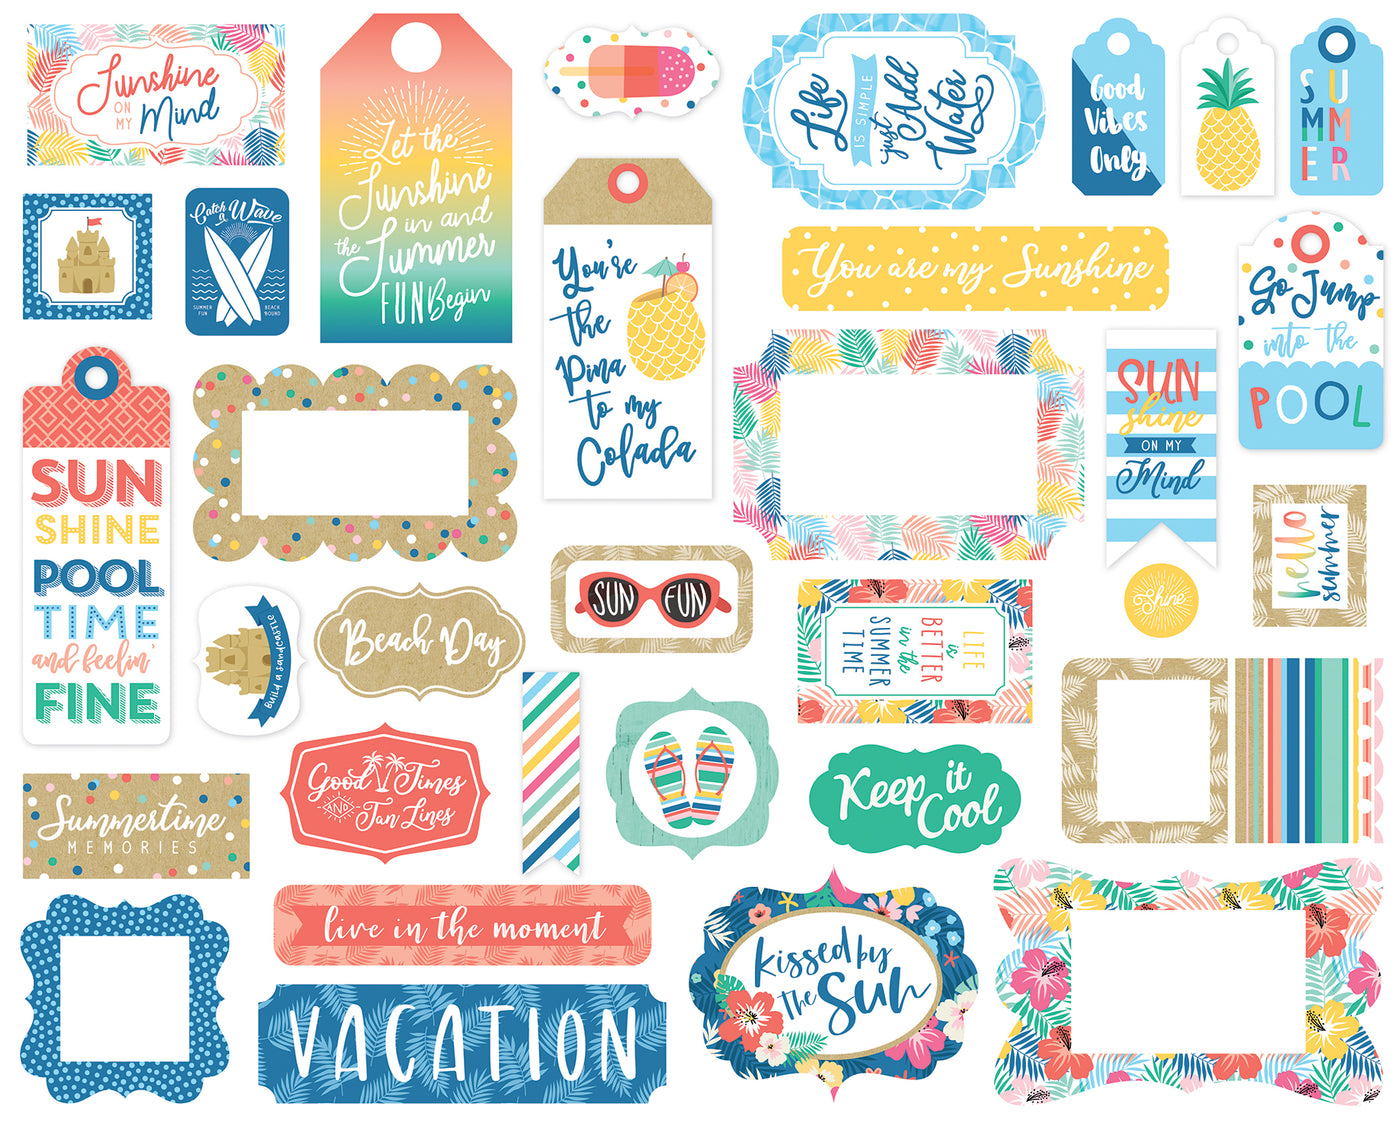 Dive Into Summer Frames & Tags Die Cut Cardstock Pack.  Pack includes 33 different die-cut shapes ready to embellish any project.